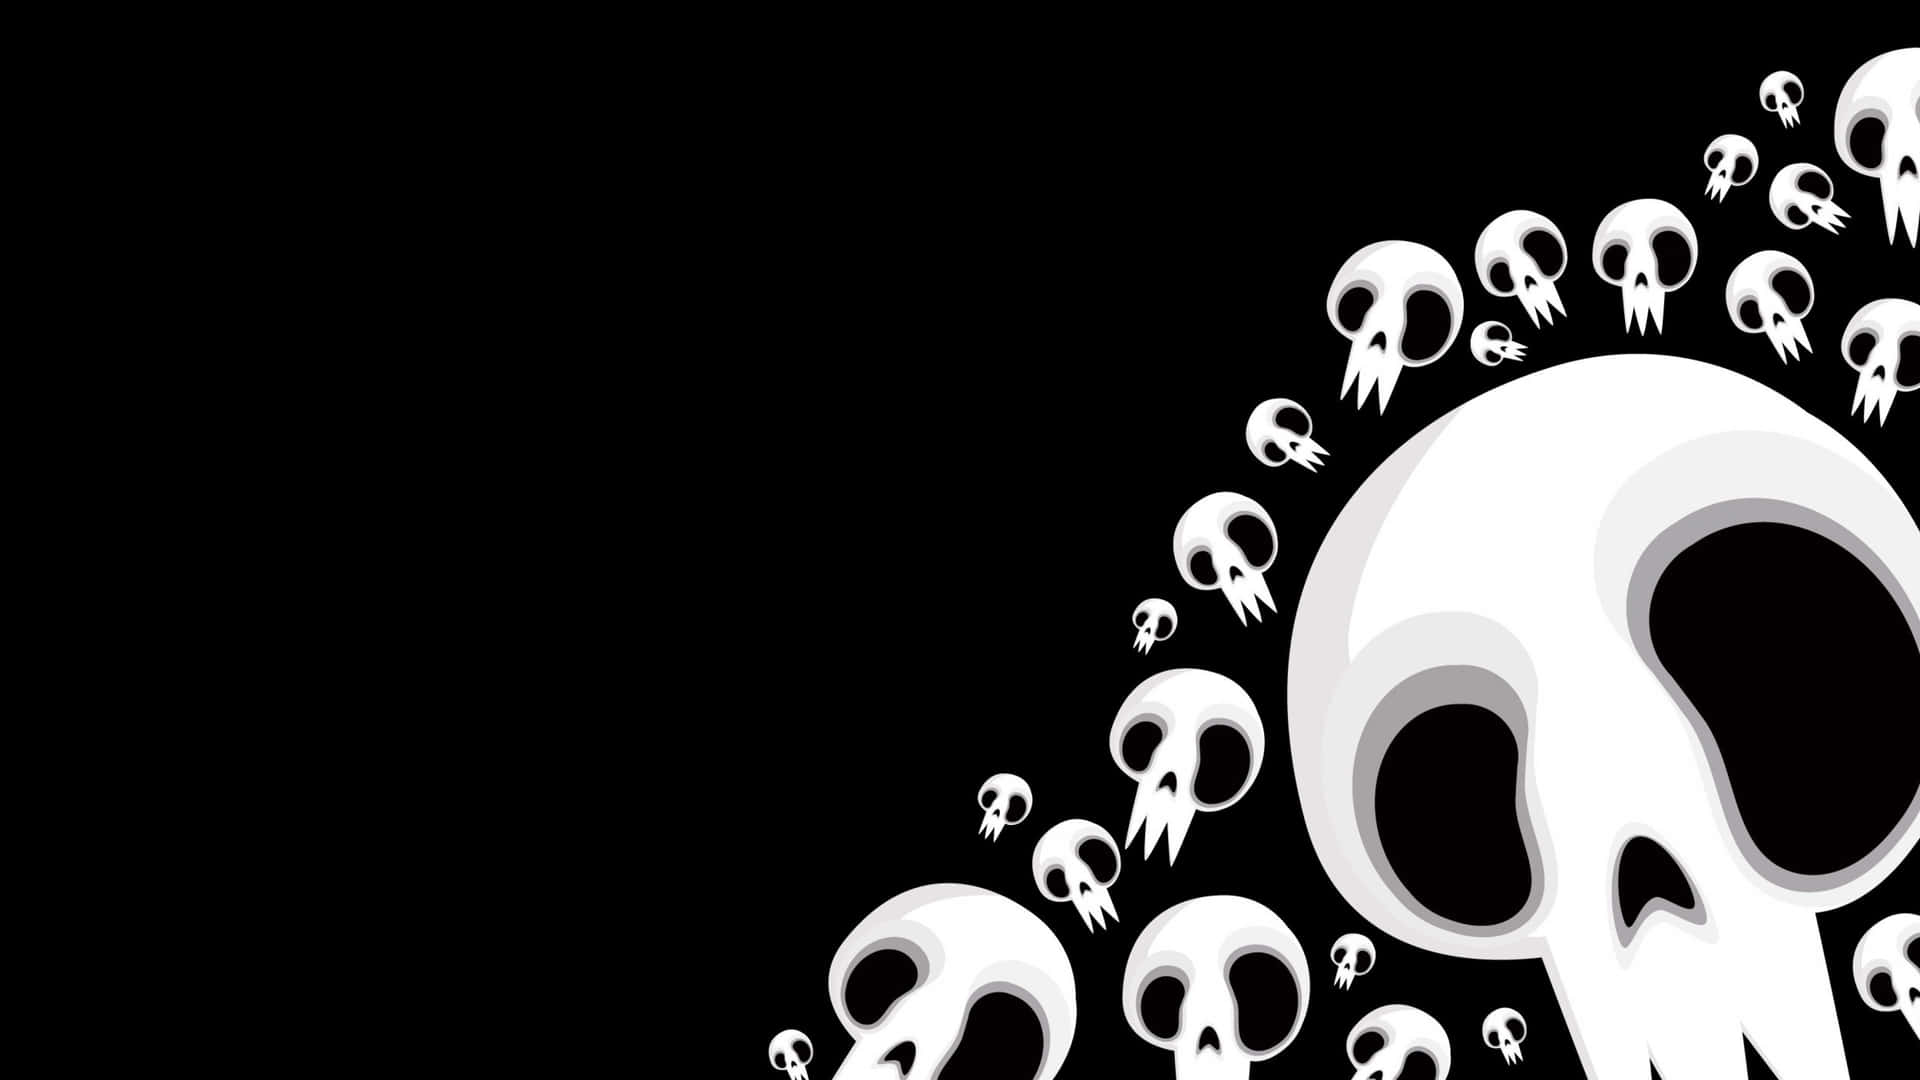 Make a Statement with an Awesome Skull Wallpaper